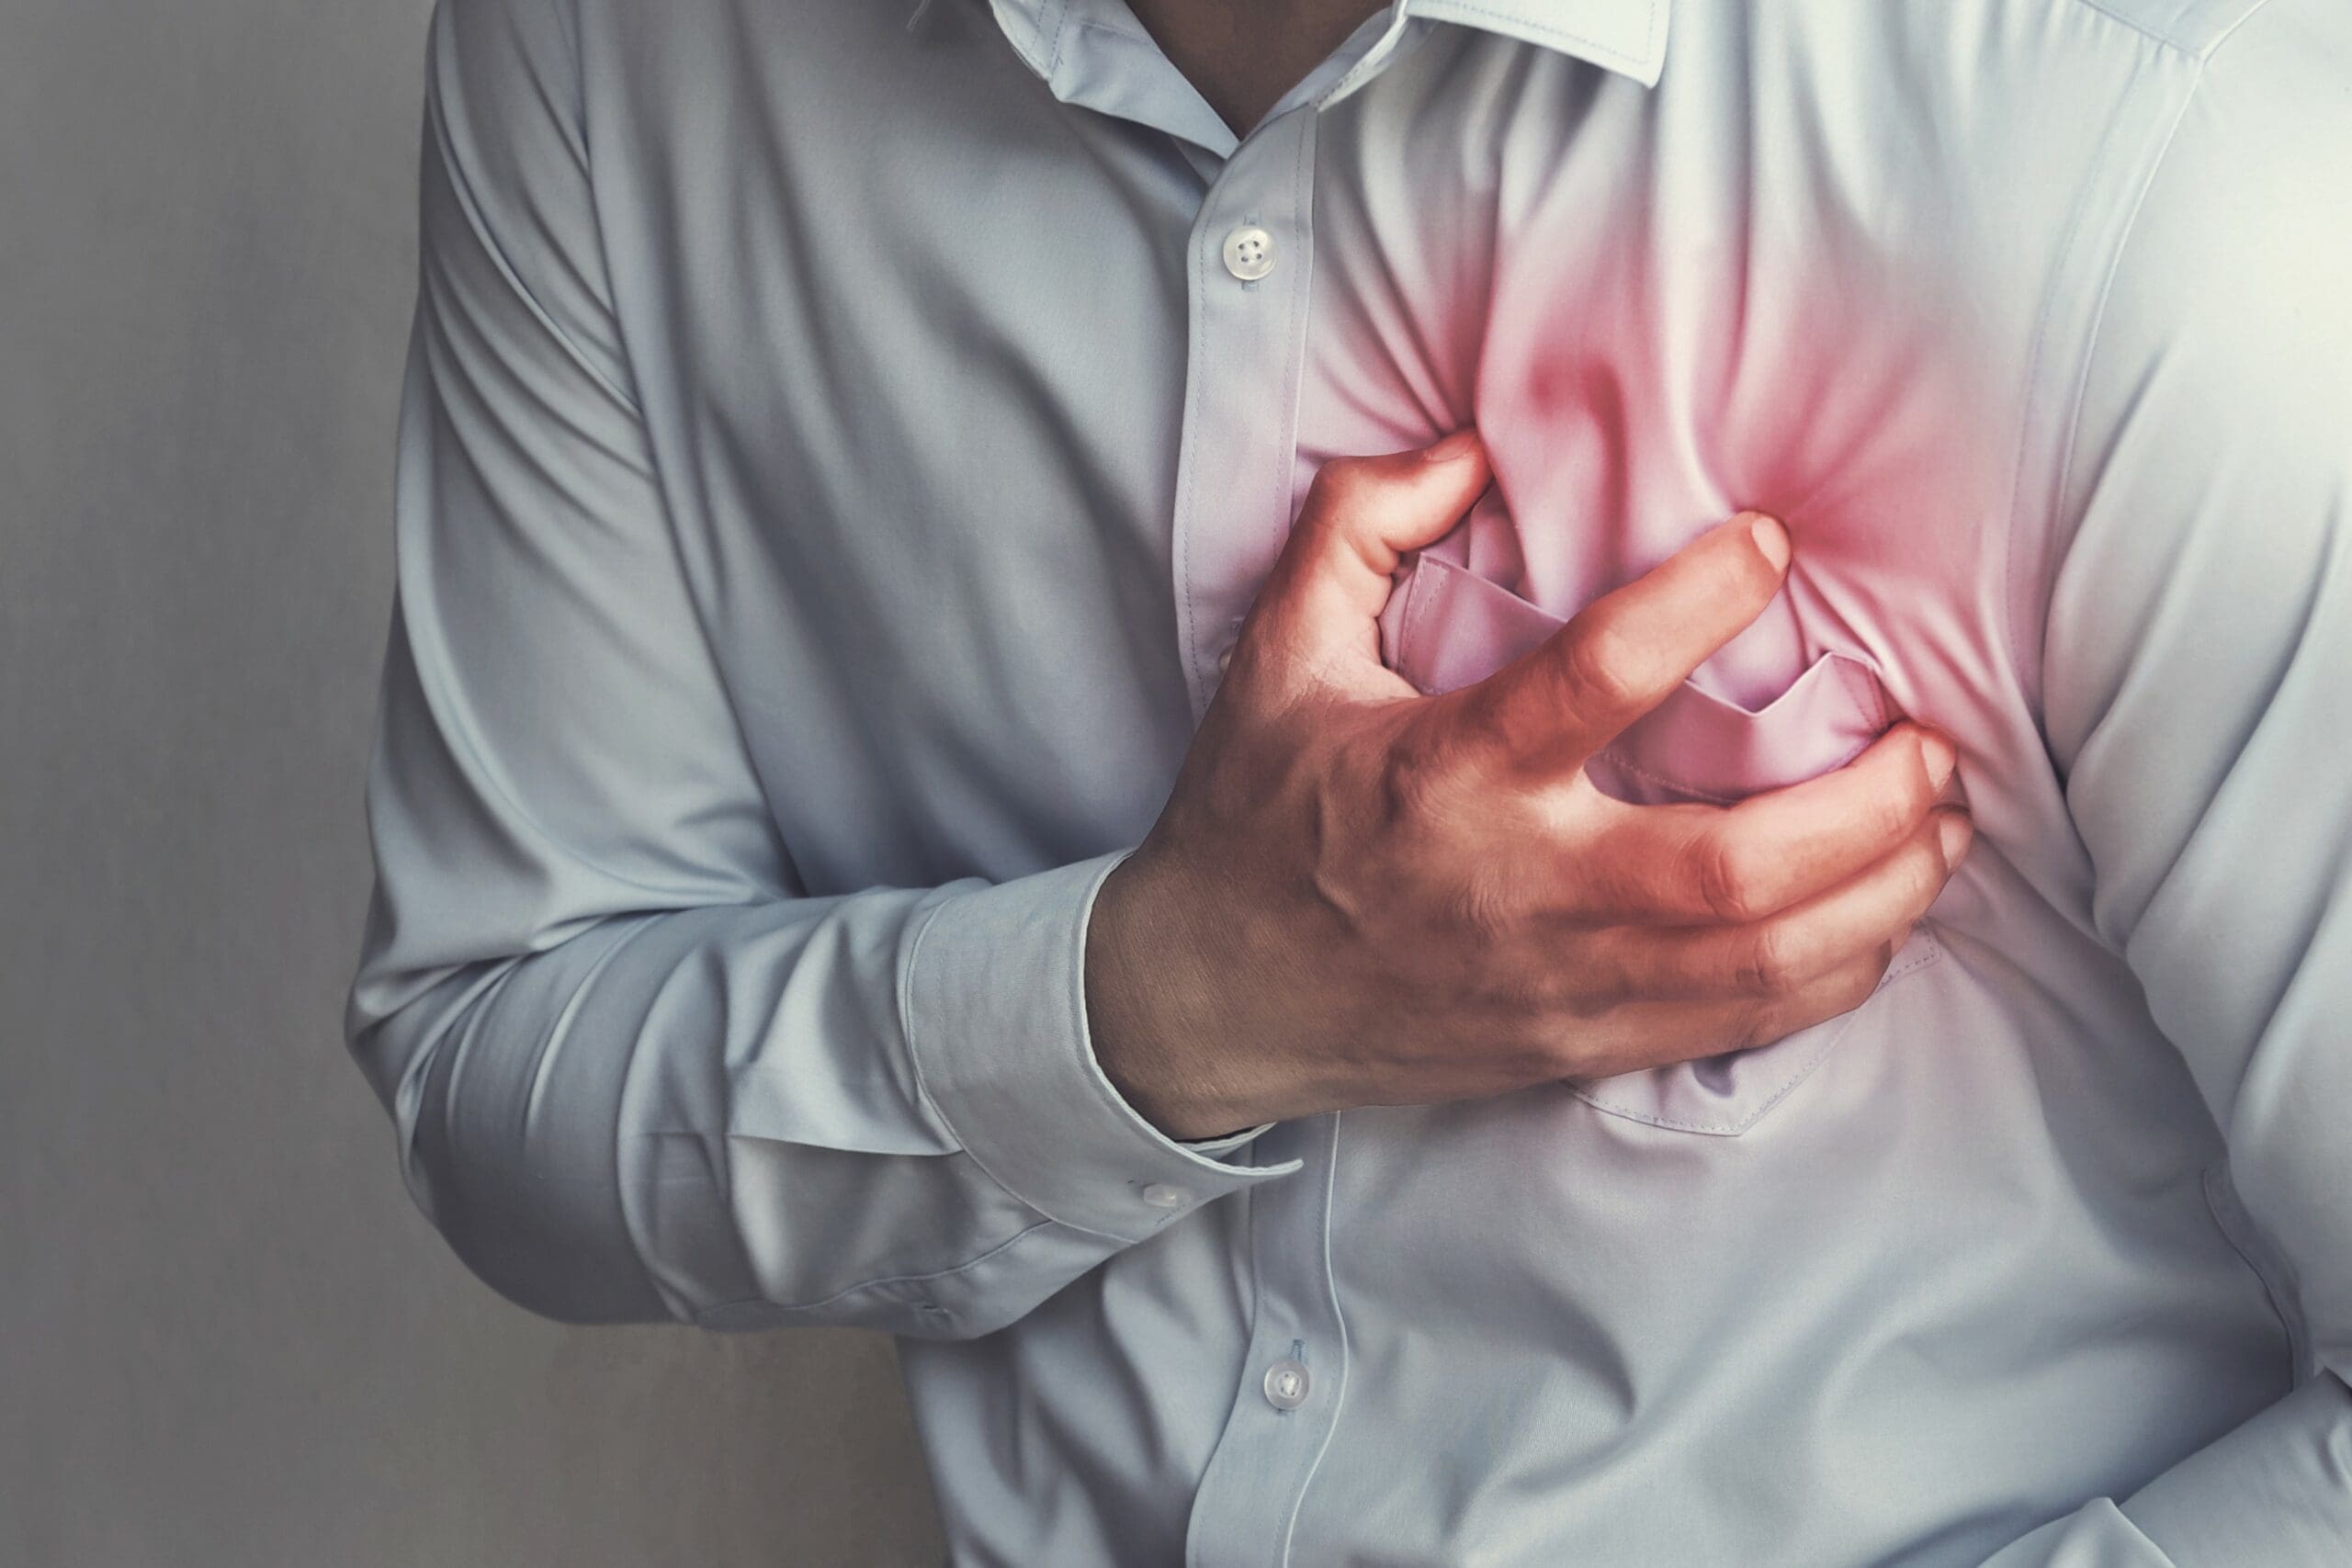 What problems does angina cause?